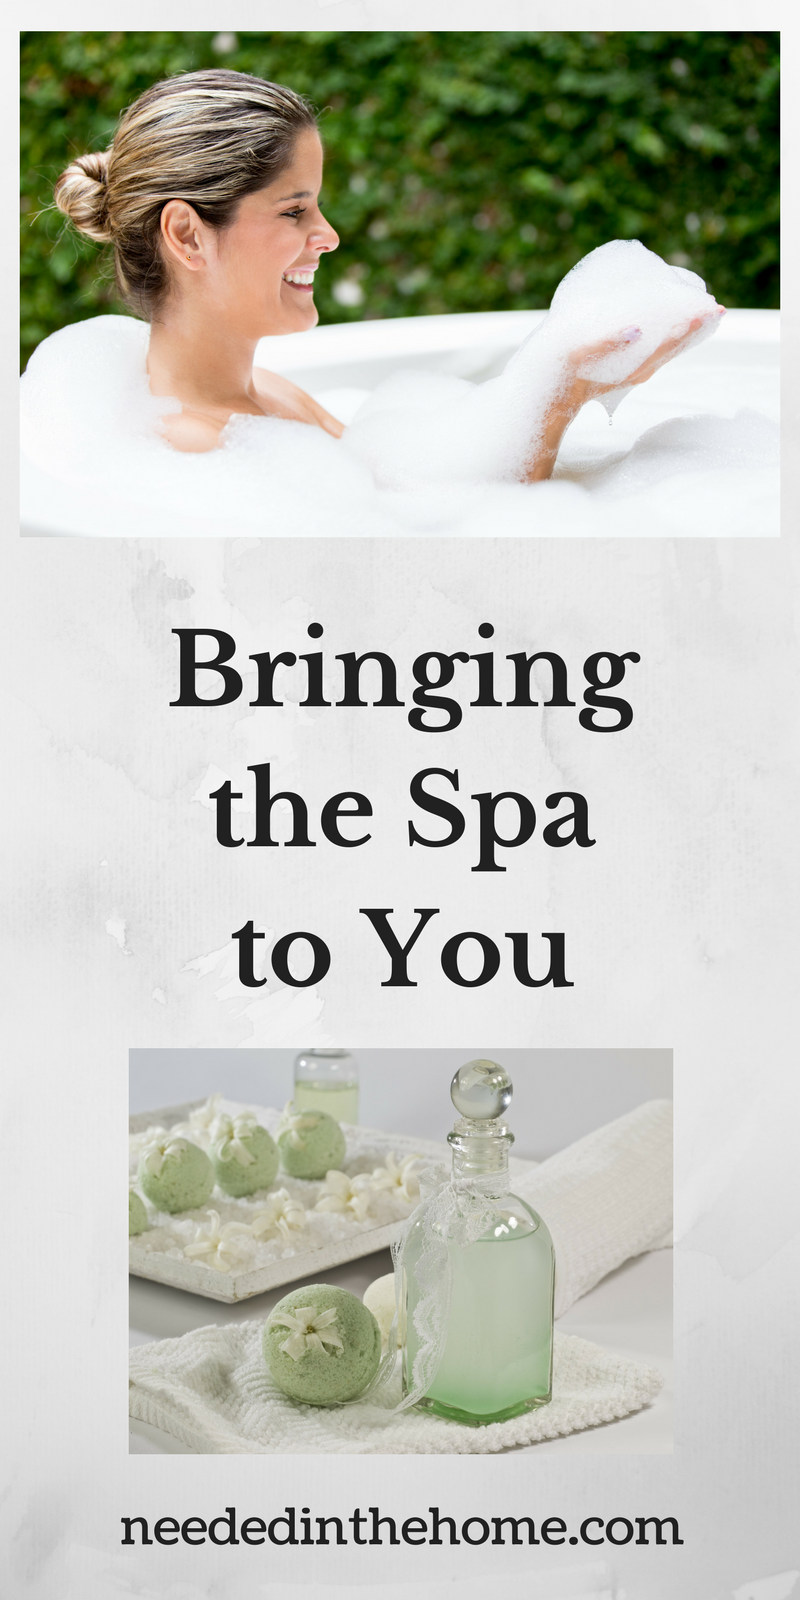 smiling woman in bubble bath soaps bath oils Bringing the Spa to You neededinthehome